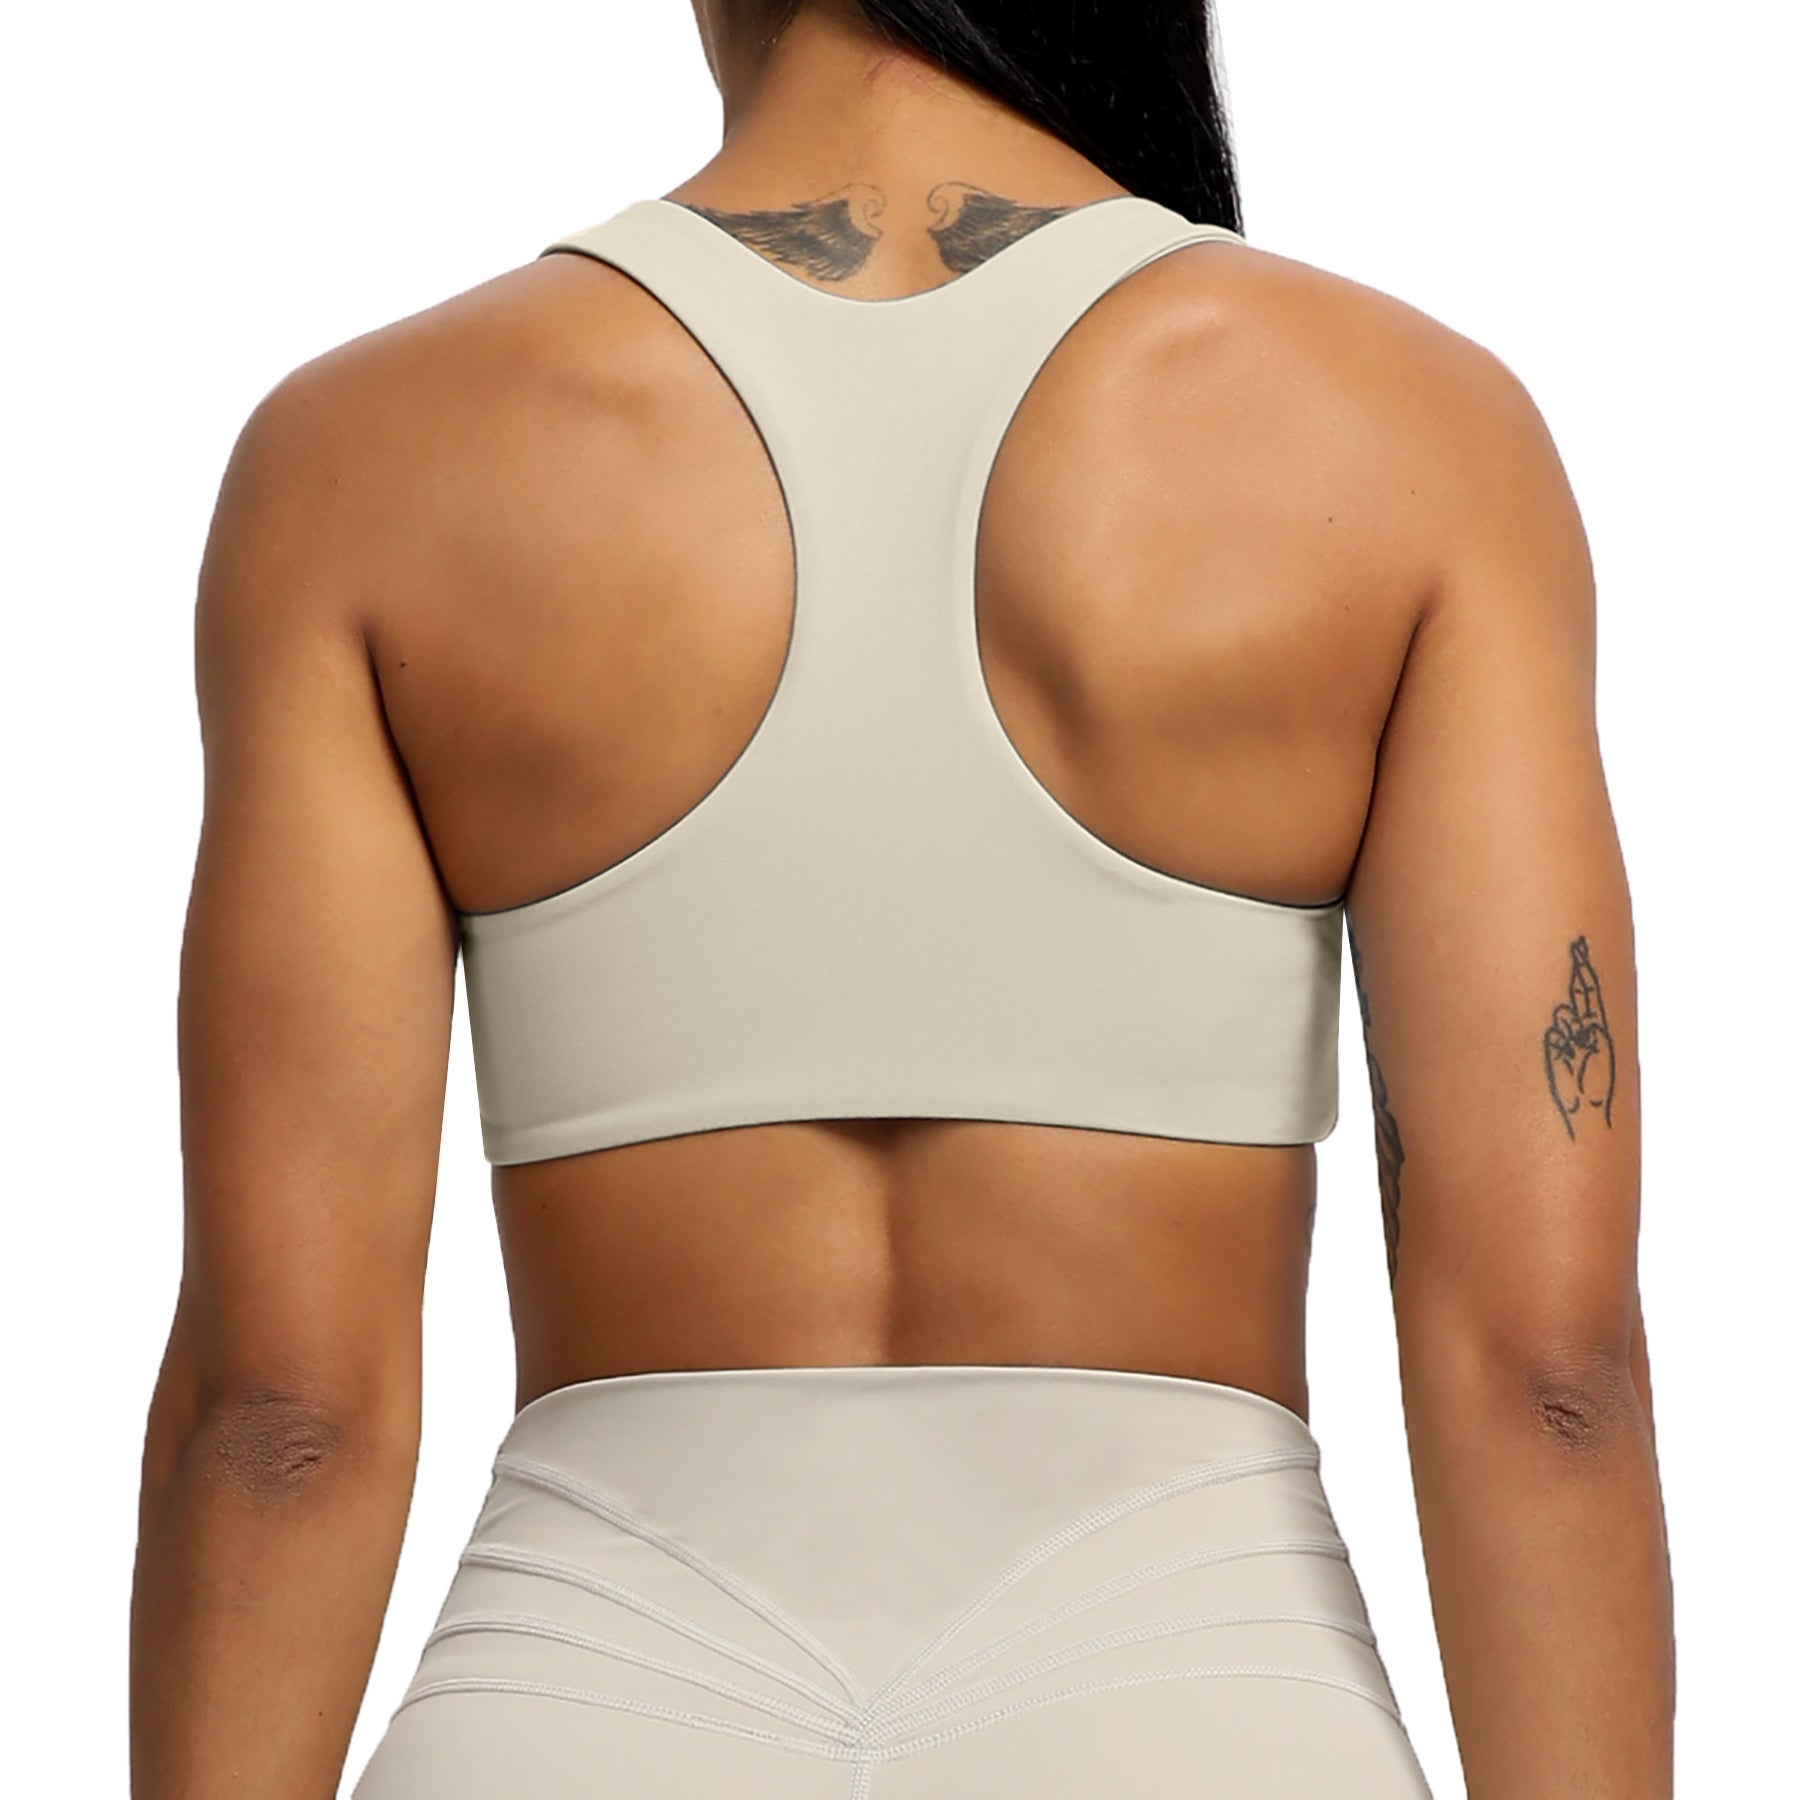 Aoxjox Sports Bra Tan - $18 (35% Off Retail) - From Saleen